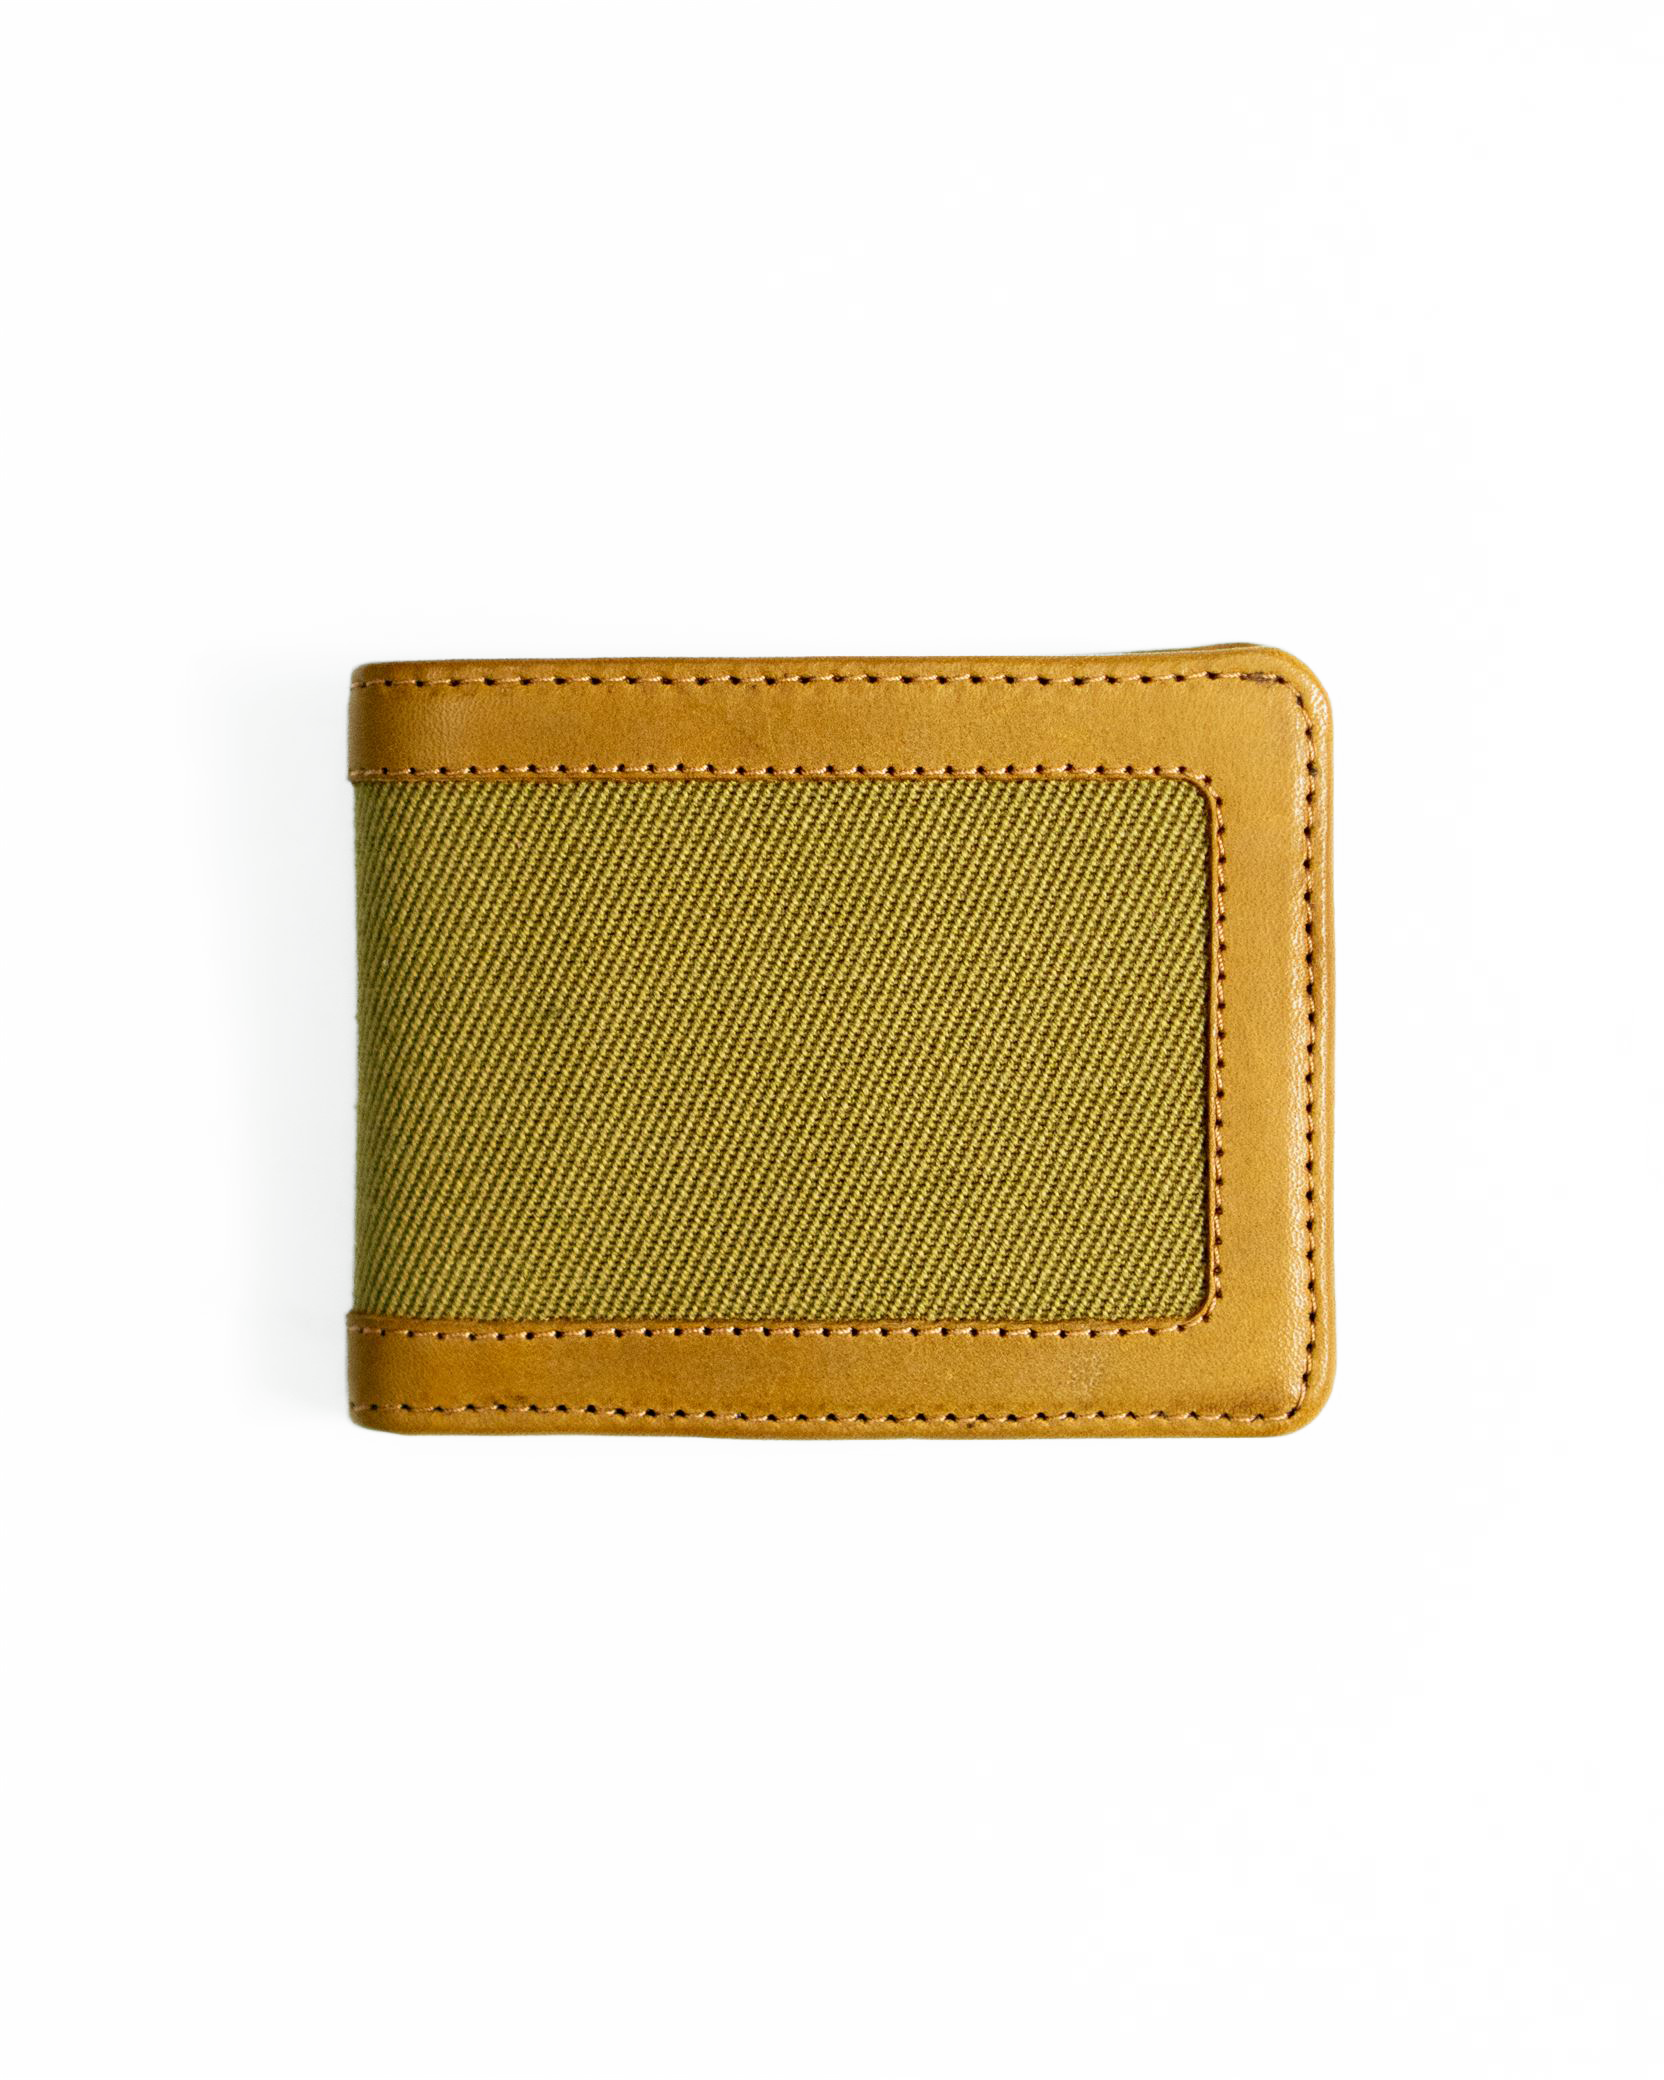 Outfitter Wallet 20187879 | Tan